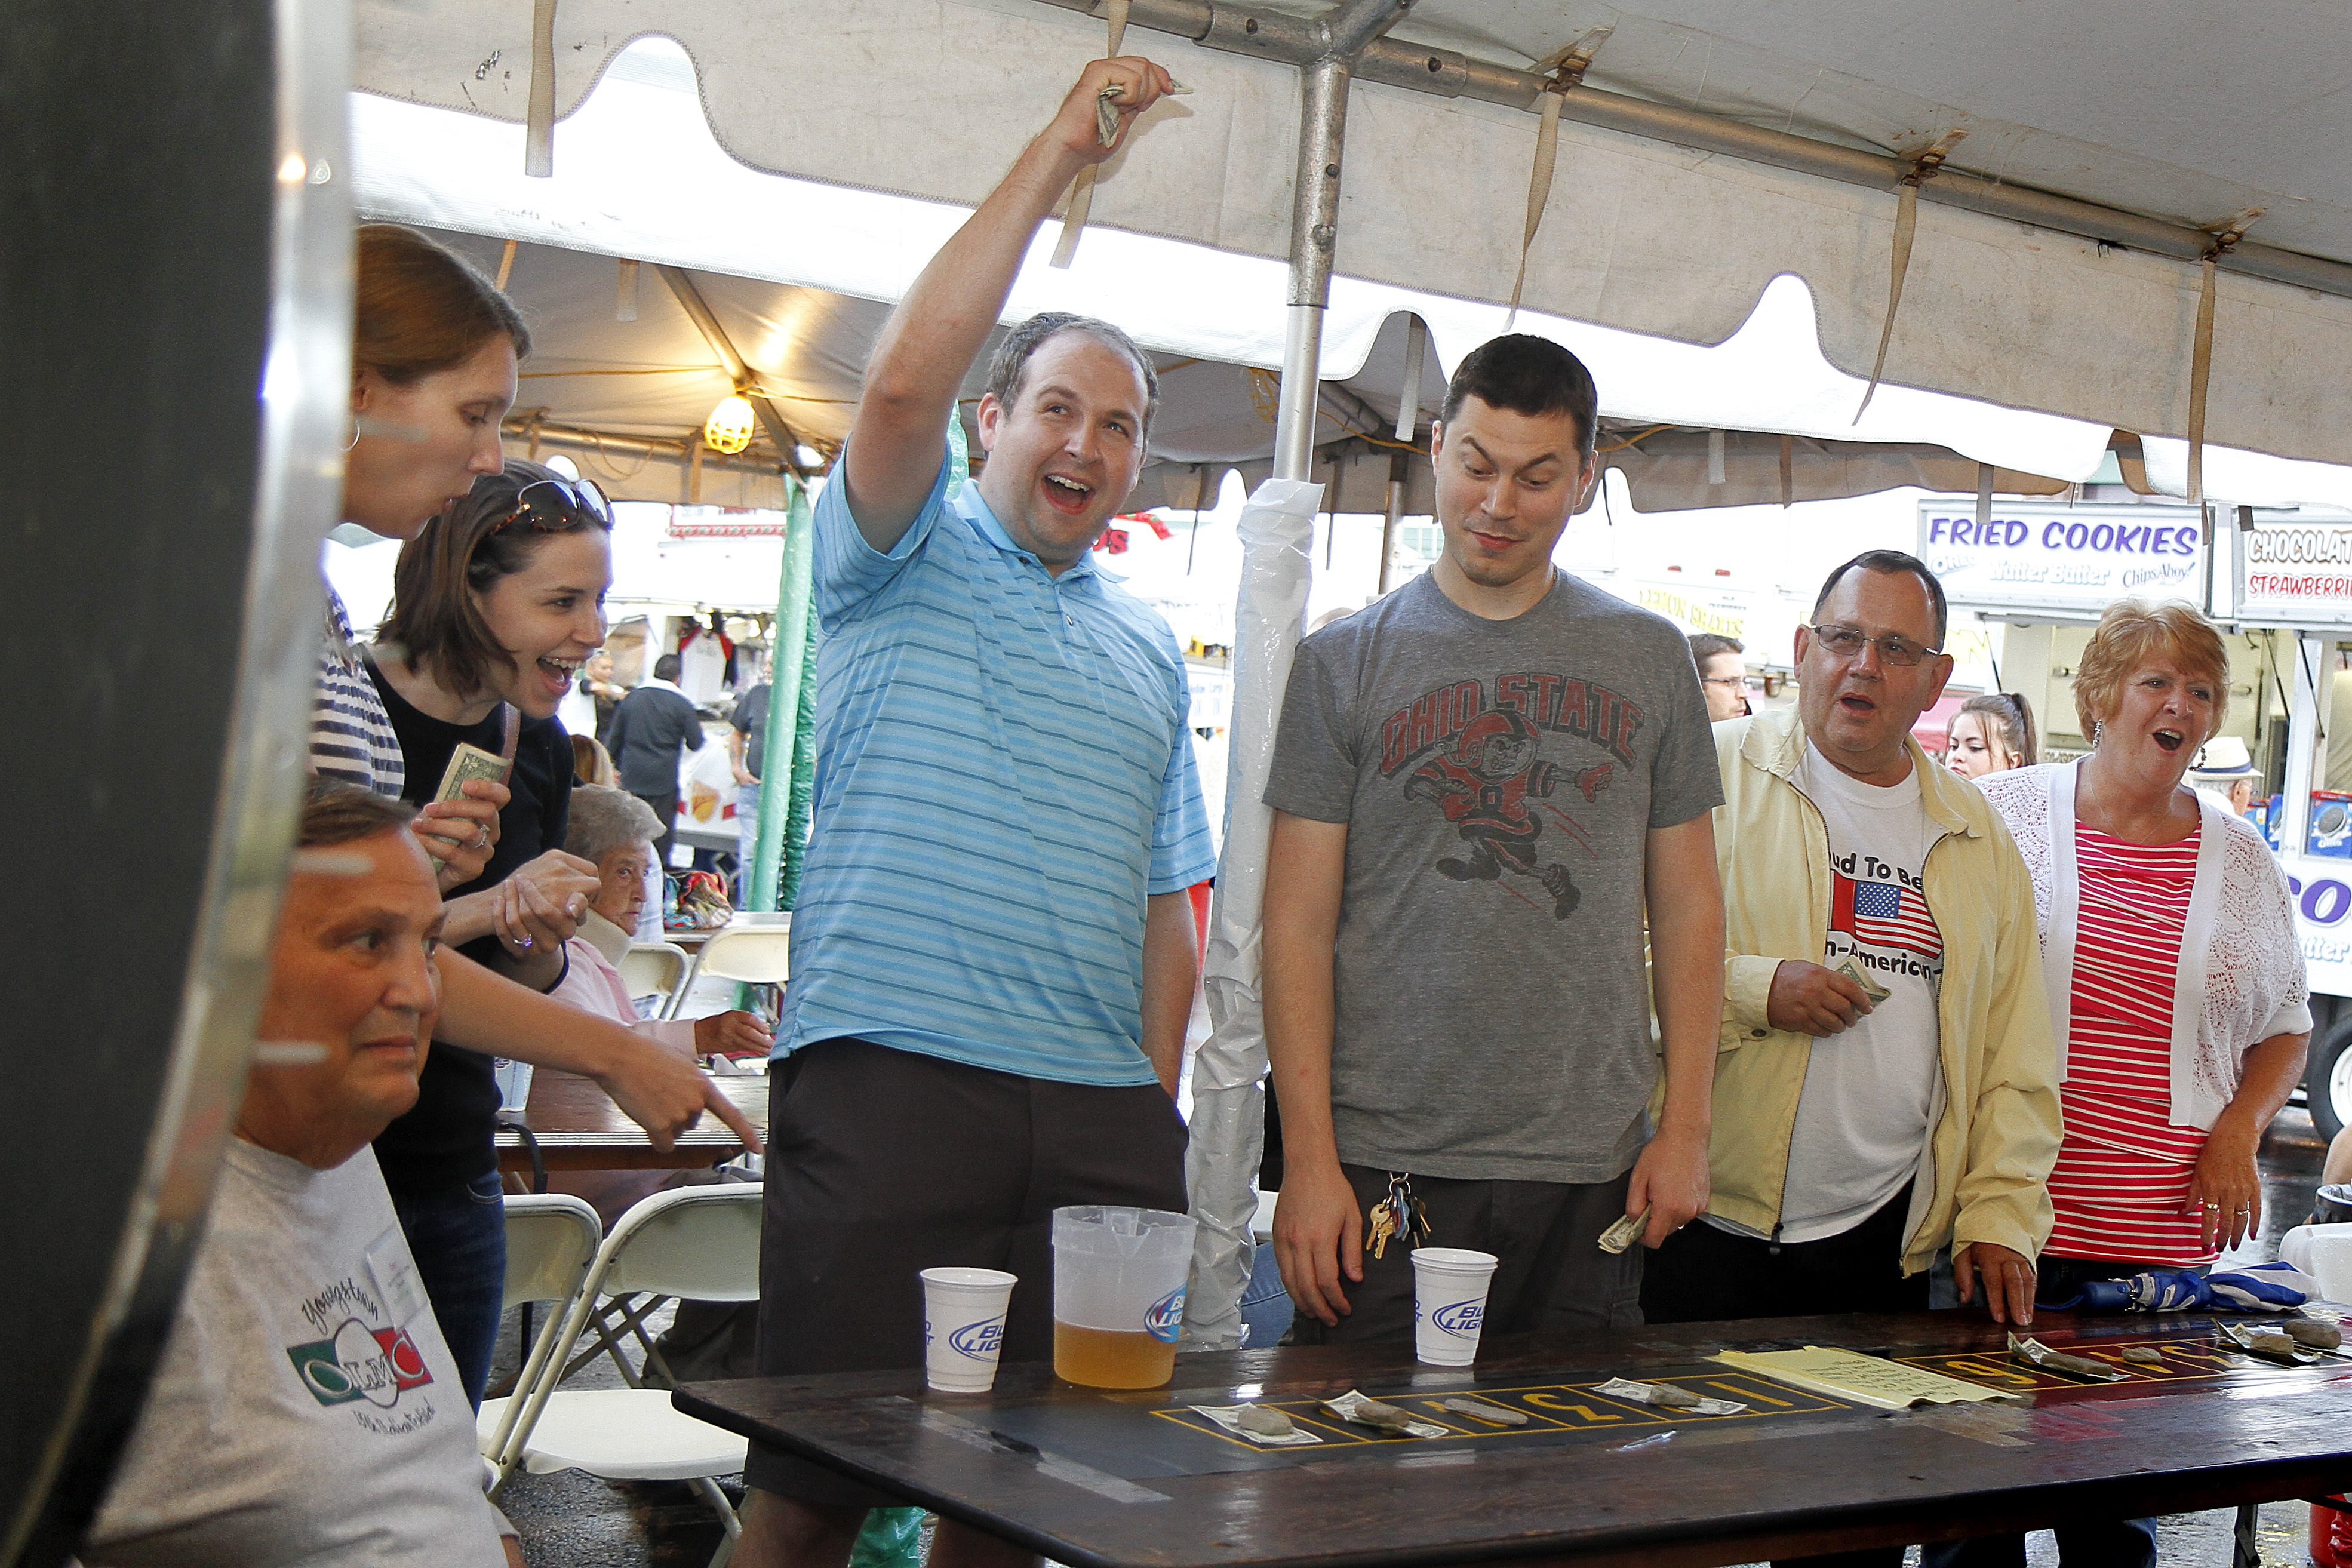 MADELYN P. HASTINGS | THE VINDICATOR

(L-R) Tony Frank of Youngstown, Daron Ducay of Columbus, Abby Mosier of Youngstown, Brian Mosier of Columbus, Matt Ducay of Youngstown, Mark and Nancy Preteroti of Lisbon react to a chuck-a-luck game at the 15th annual Our Lady of Mount Carmel Italian Festival on Saturday, July 27.